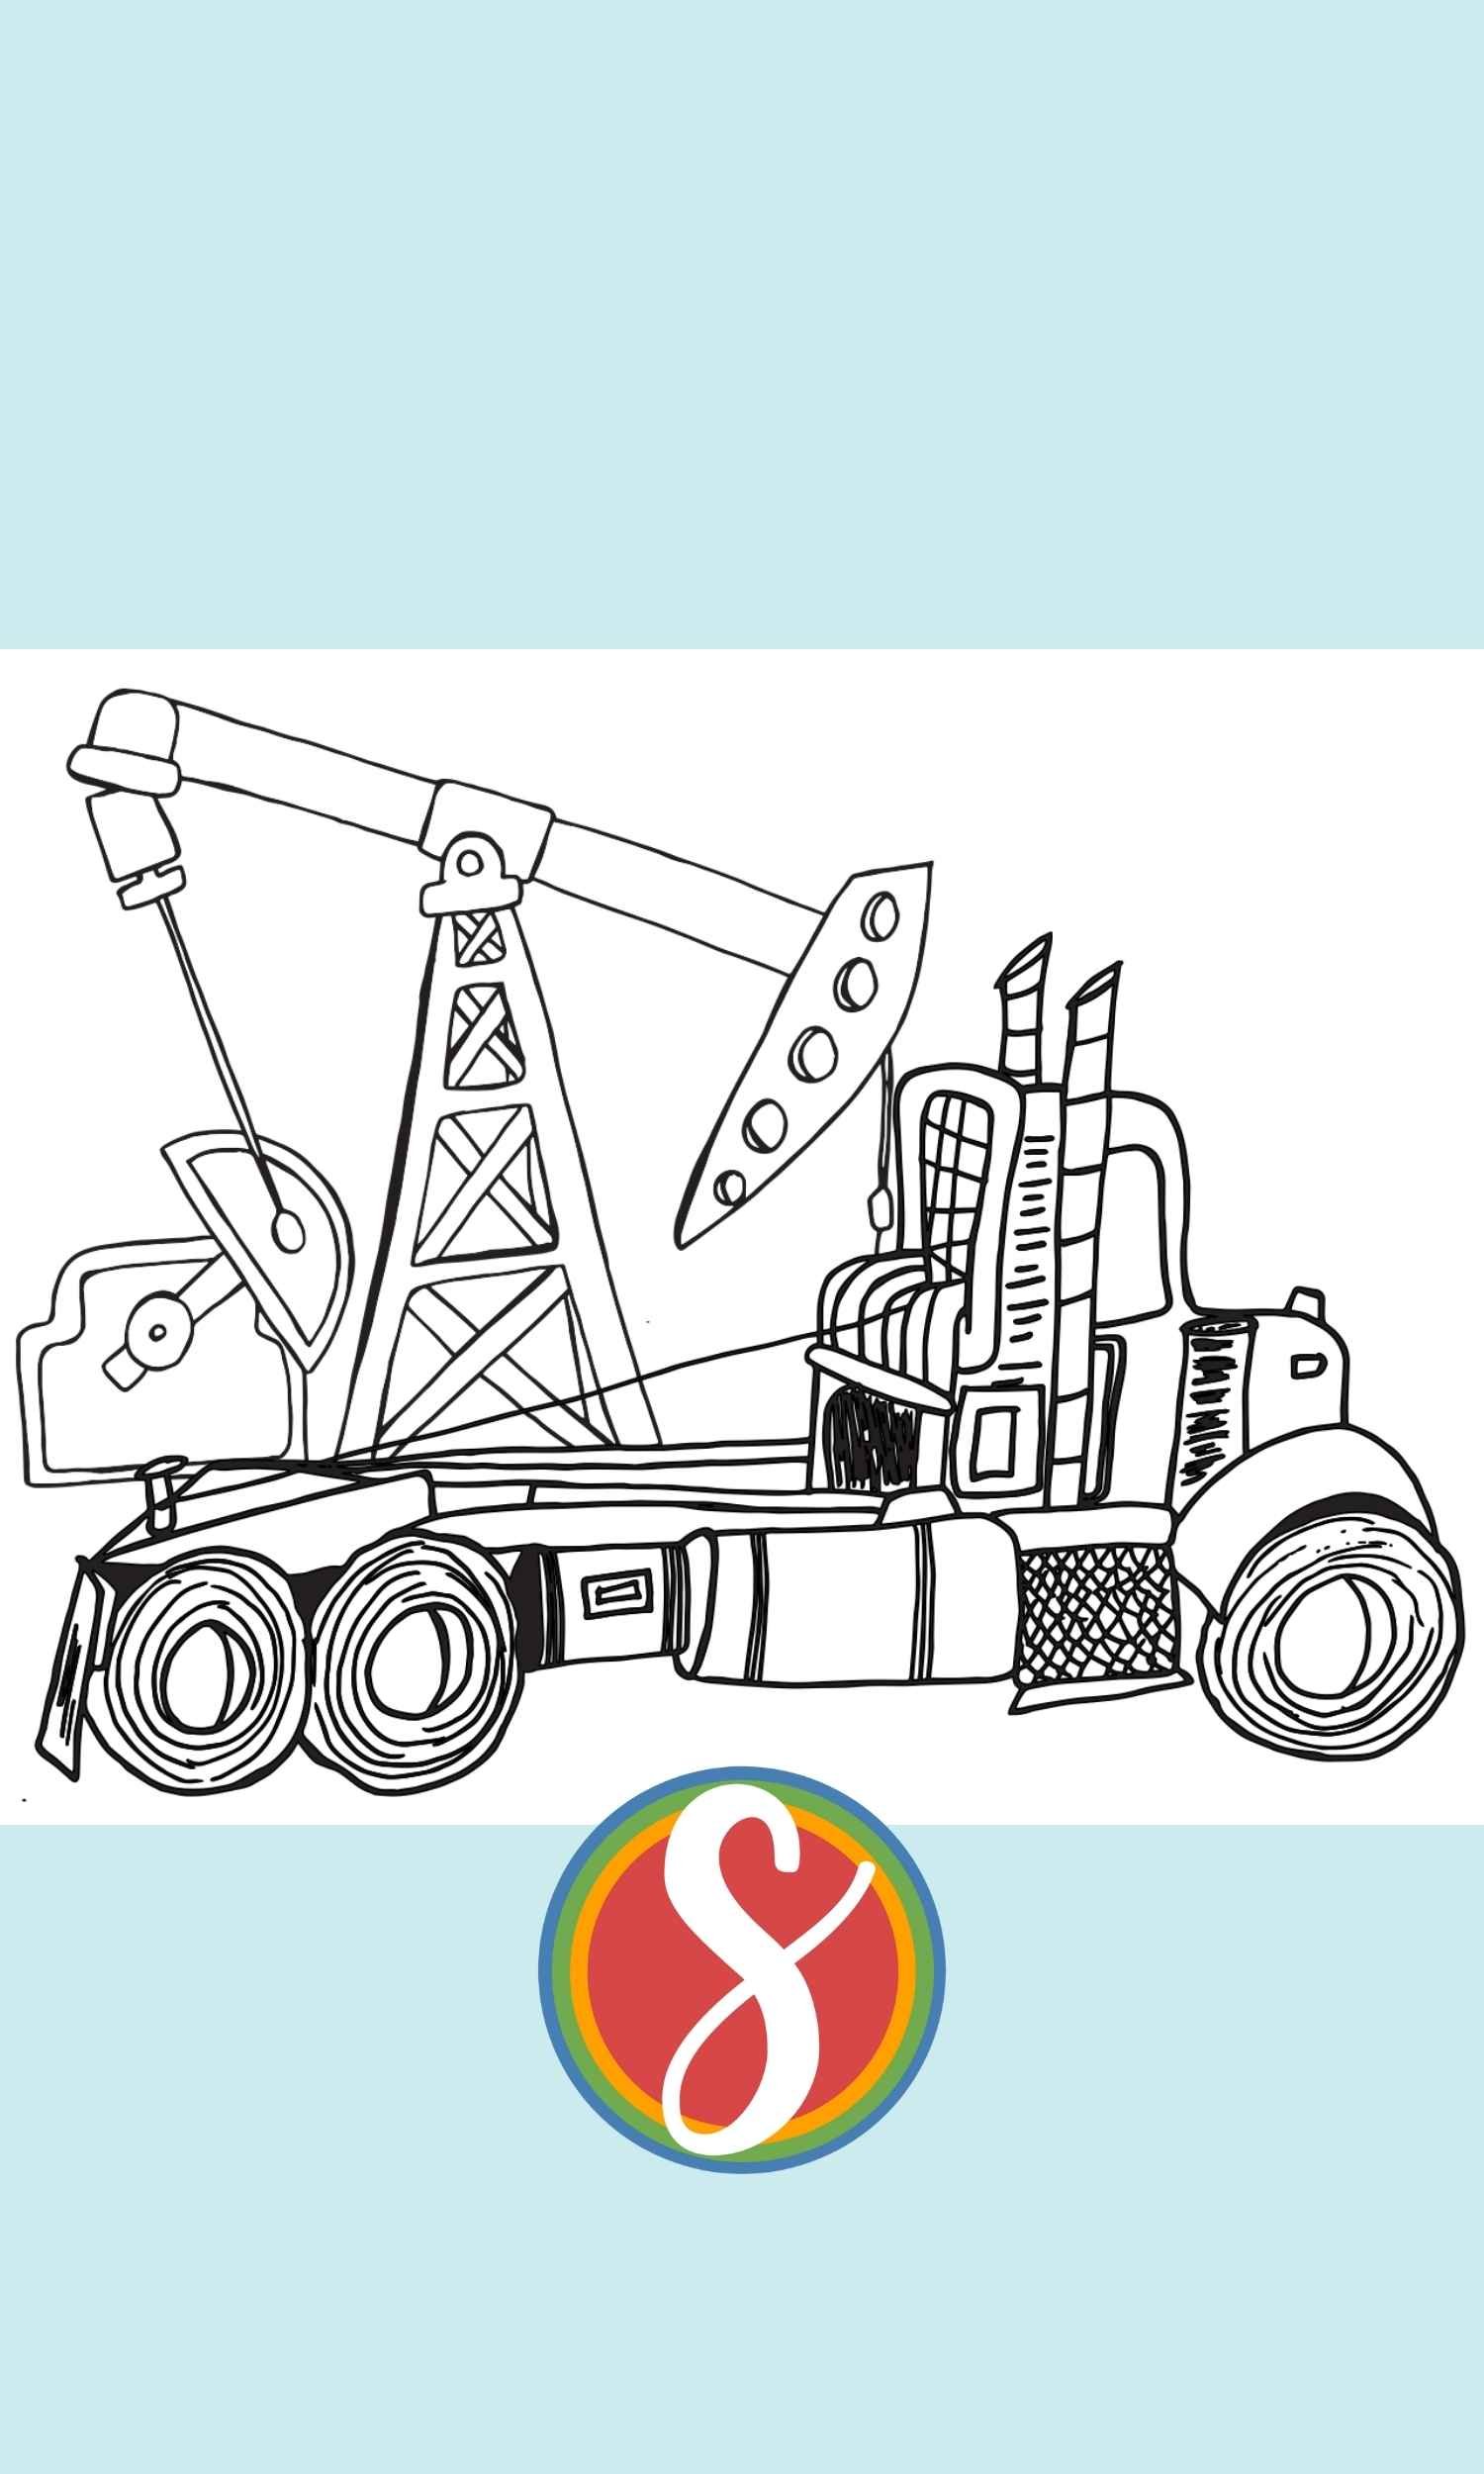 truck coloring page with a big rig truck sitting in front of an oil rig on